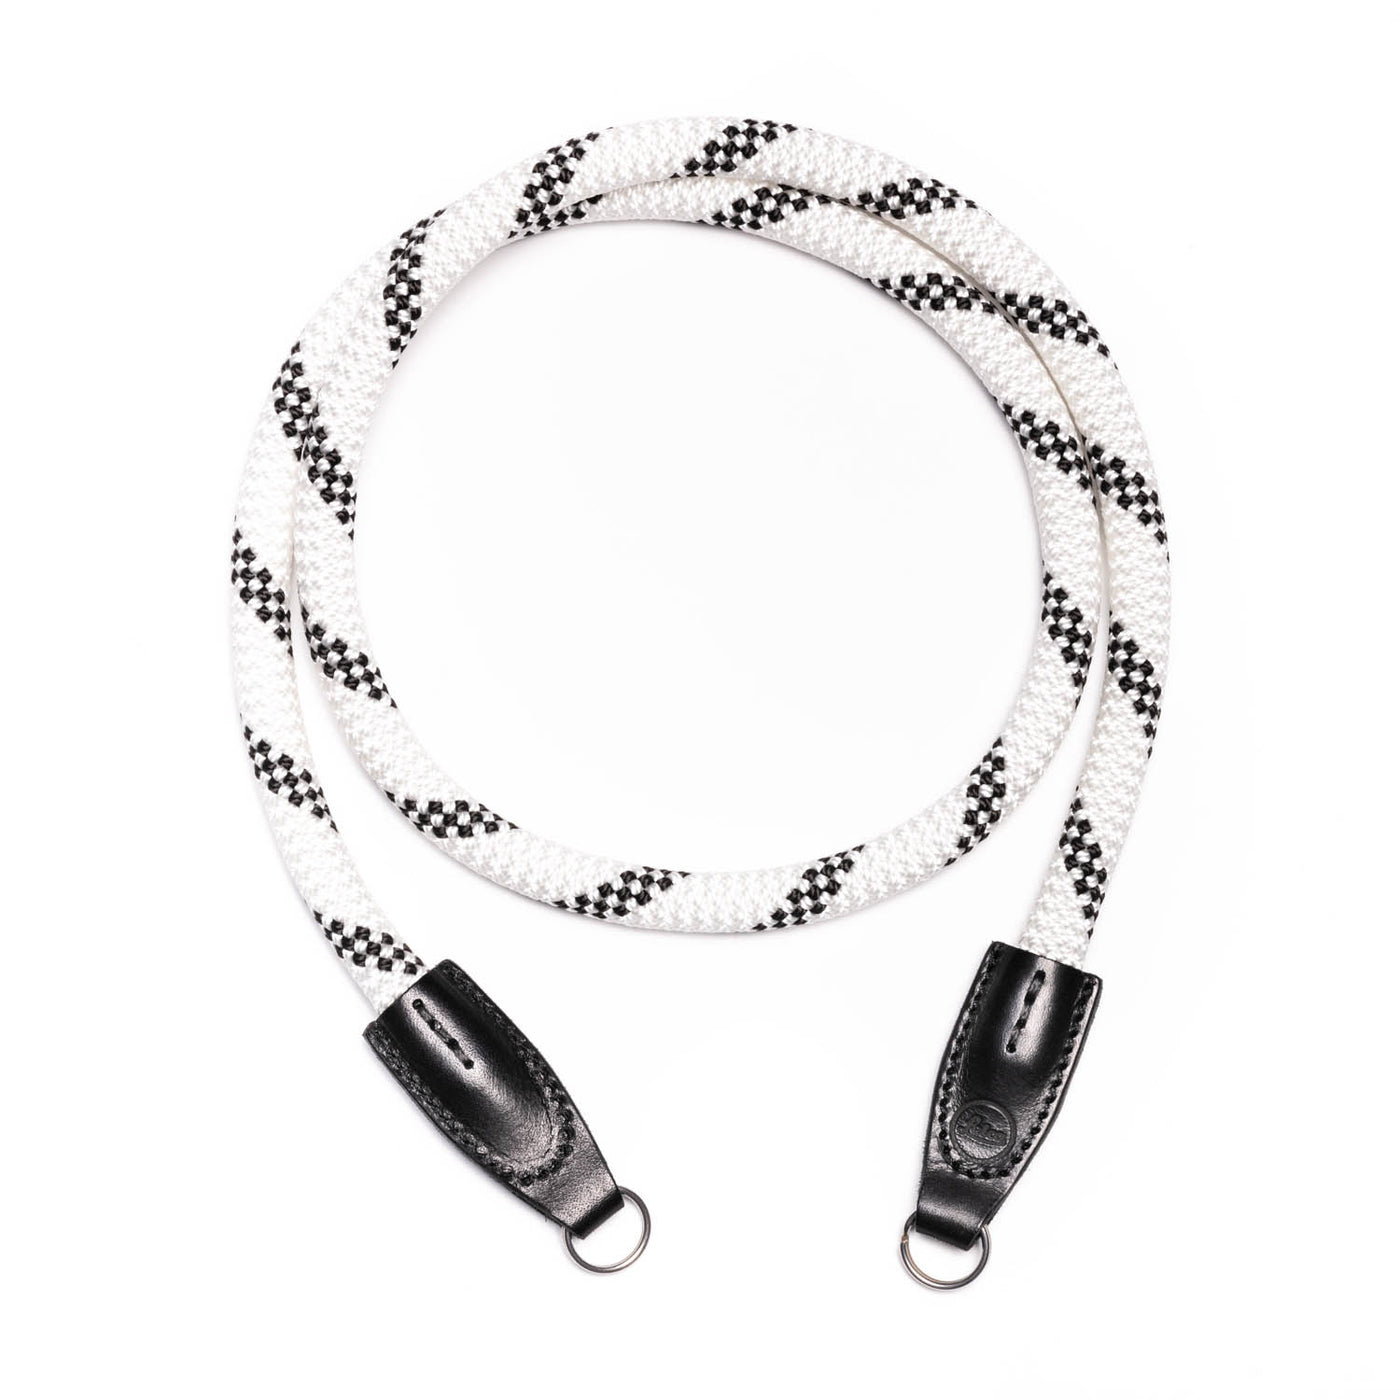 Leica camera strap in a loop with metal rings 